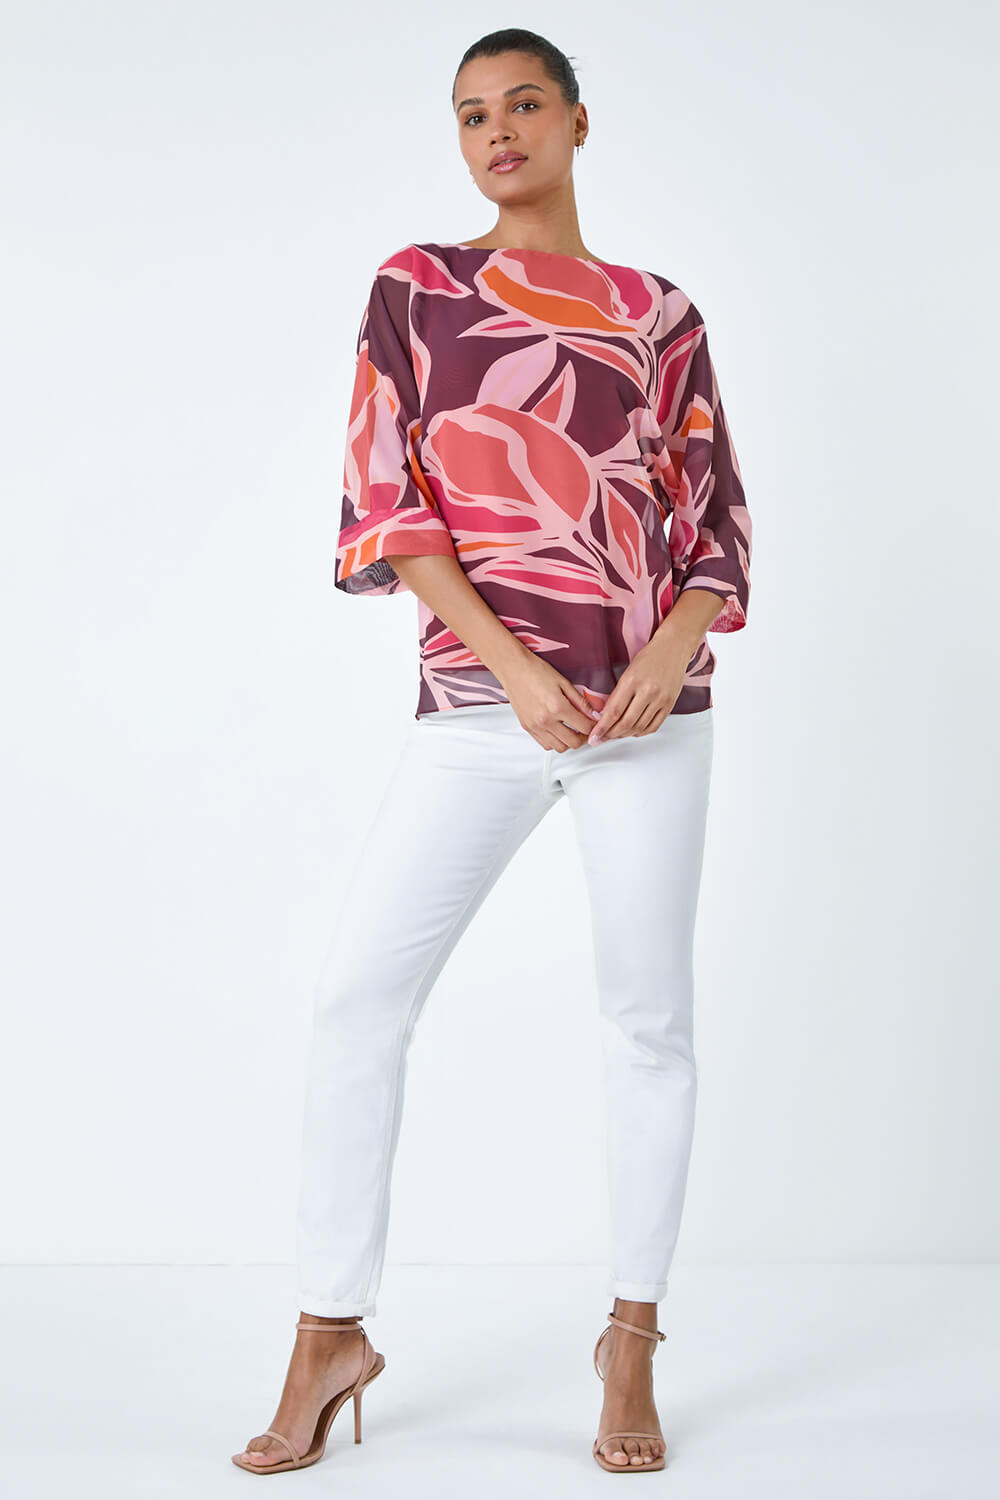 CORAL Floral Print Overlay Top, Image 4 of 5